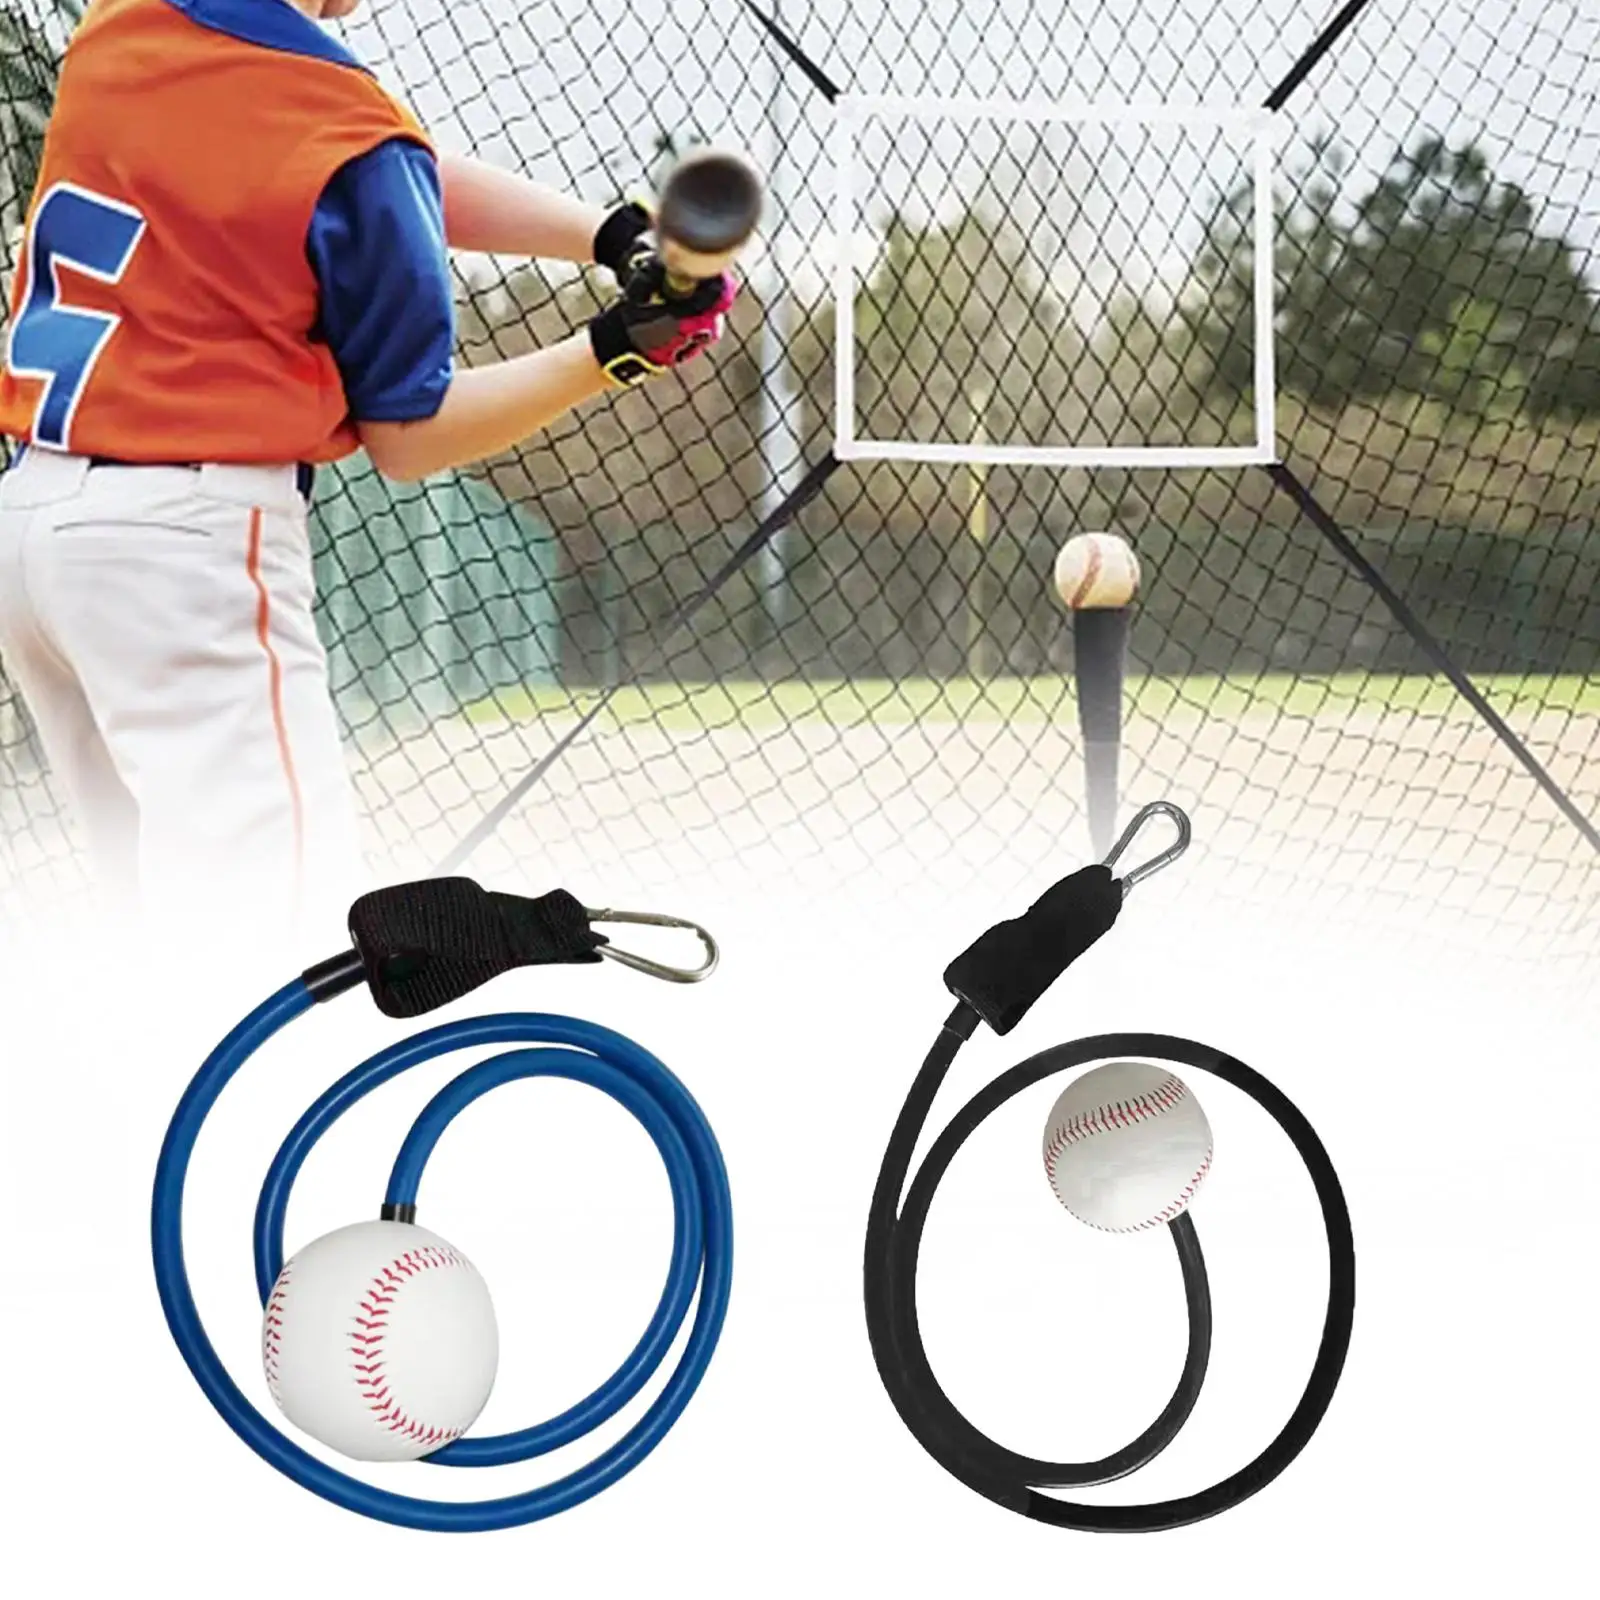 Baseball Pitching Bands Portable Baseball Trainer Outdoor Baseball Training Bands for Kids Adults Throwing Workout Stretch Arm